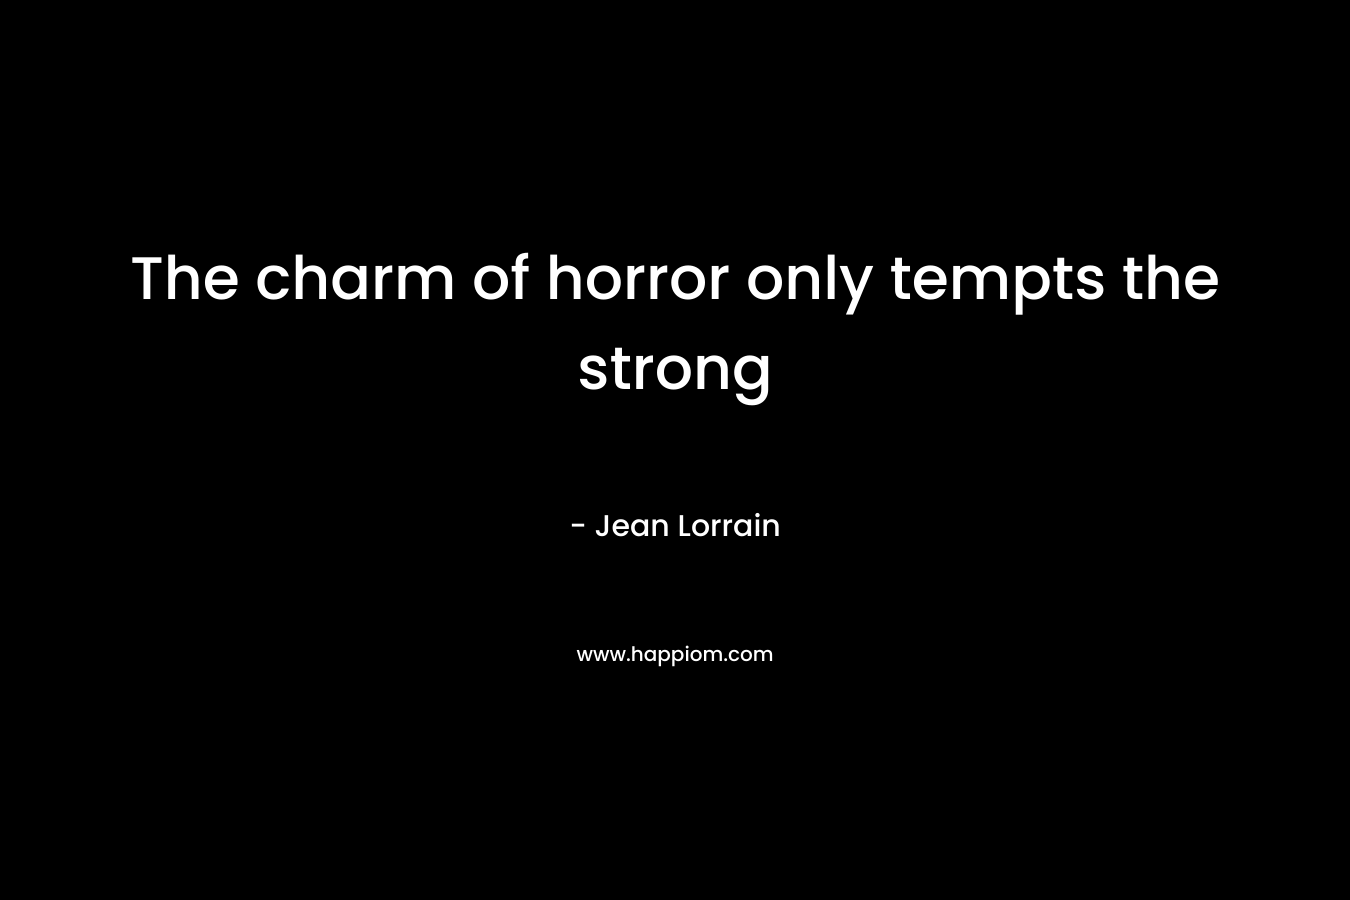 The charm of horror only tempts the strong